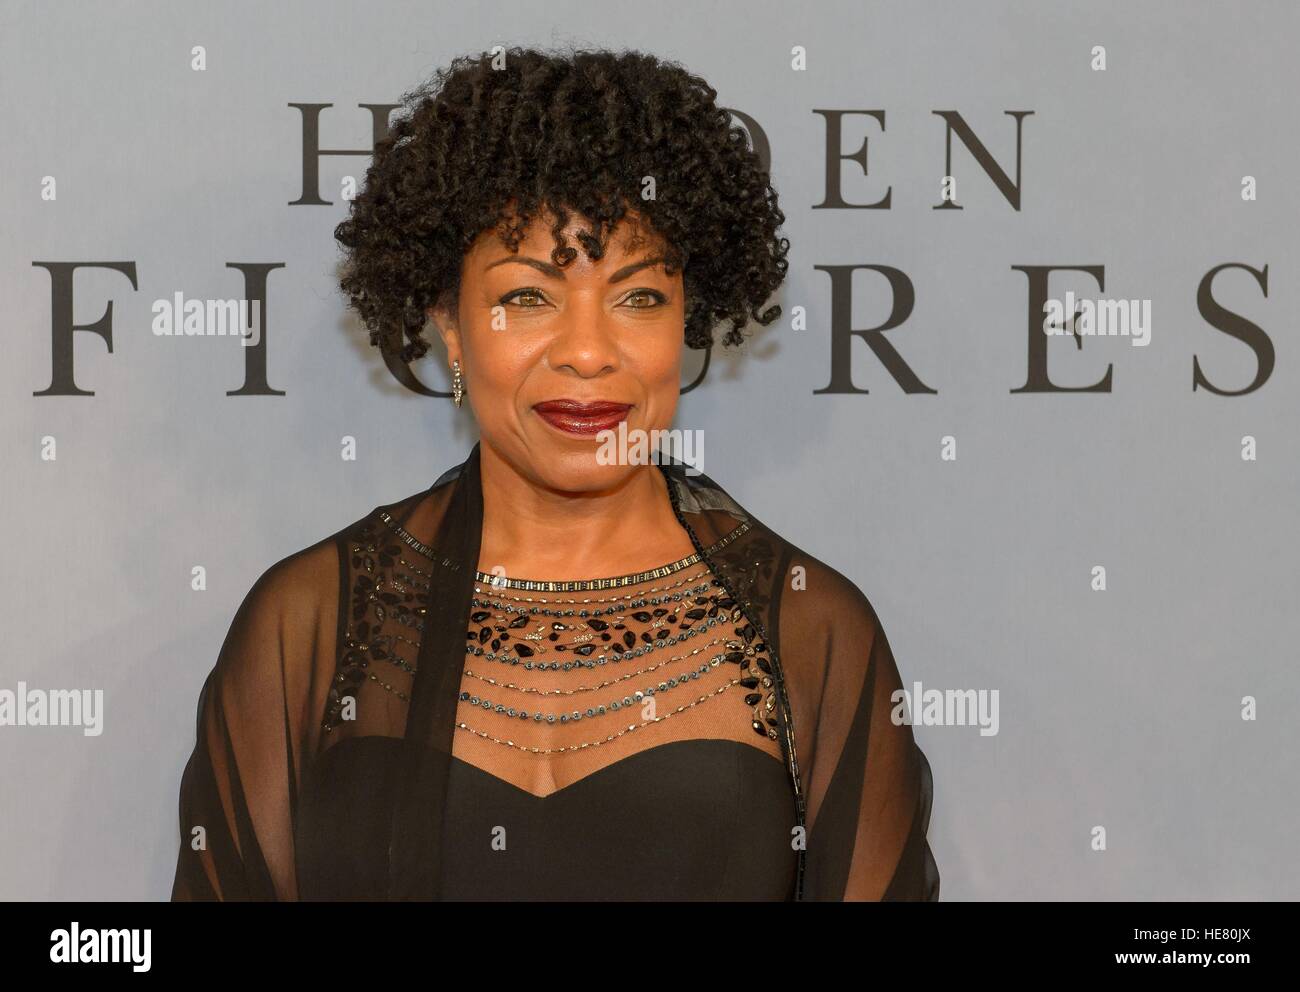 NASA Engineer Dr. Sheila Nash-Stevenson walks the red carpet during the global celebration event for the film Hidden Figures at the SVA Theatre December 10, 2016 in New York City, New York. The film is based on the true story of the African-American women who worked as human computers during the Friendship 7 mission in 1962. Stock Photo